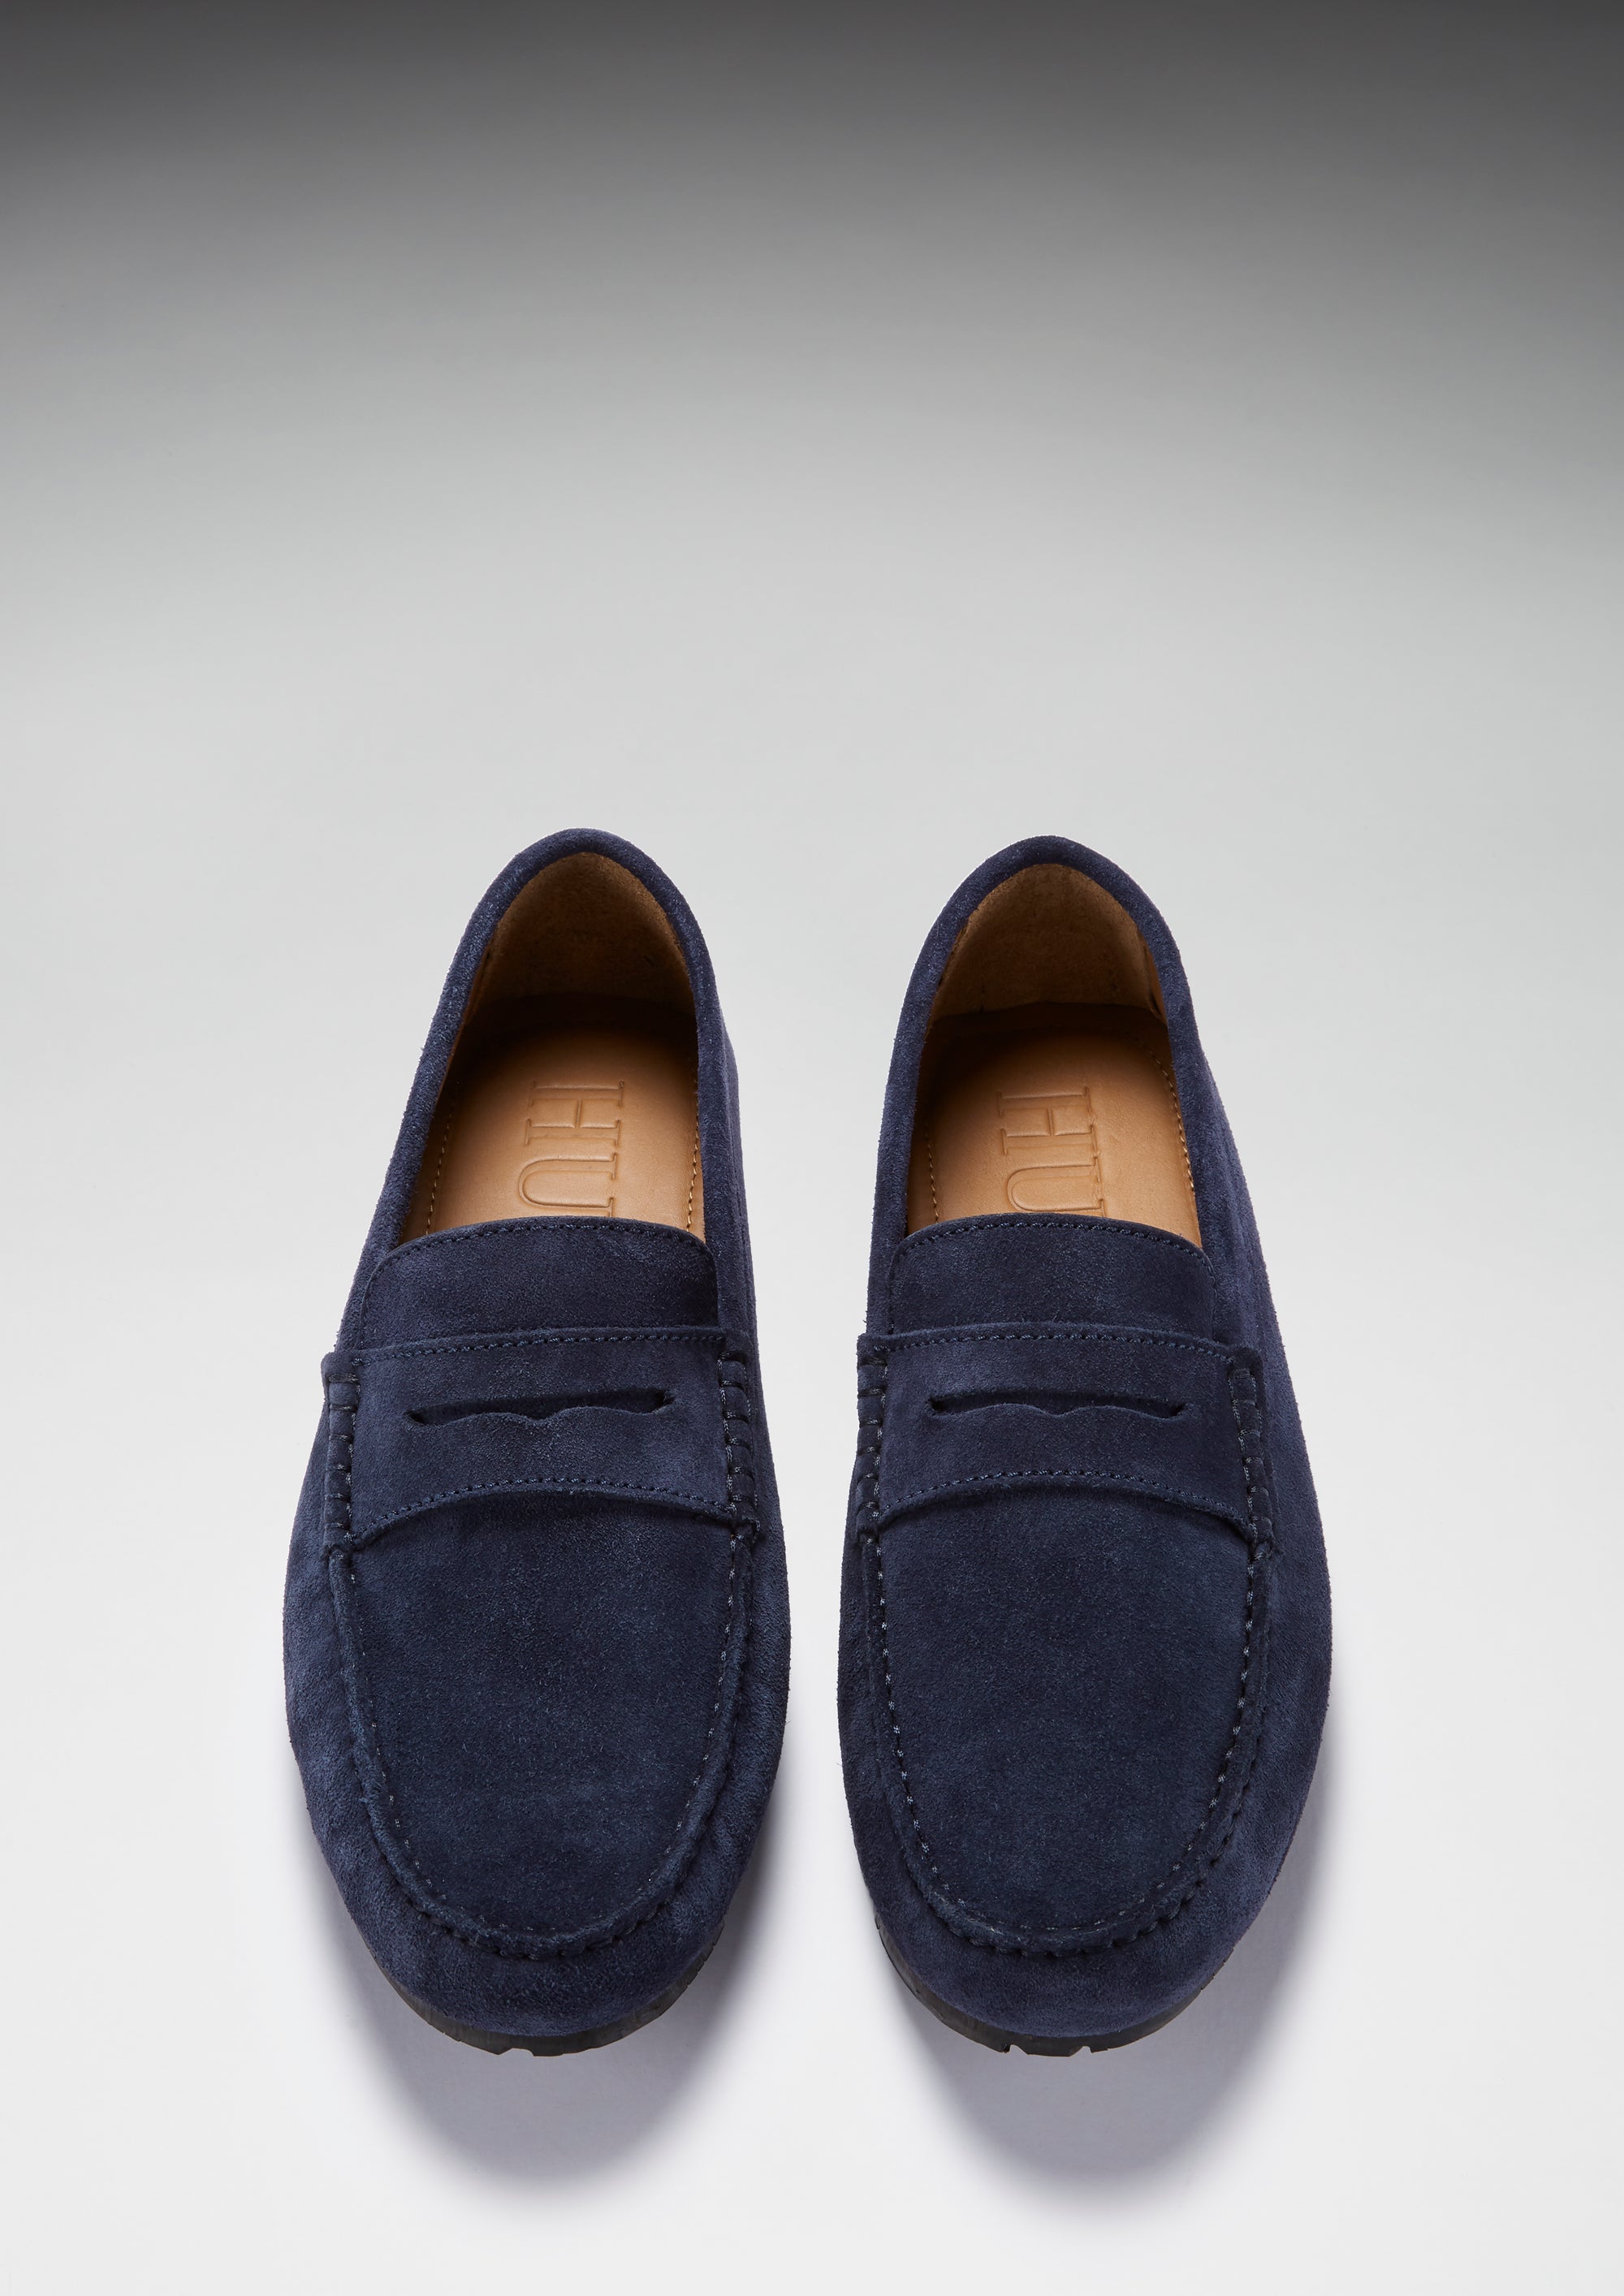 Tyre Sole Penny Driving Loafers, navy blue suede - Hugs & Co.